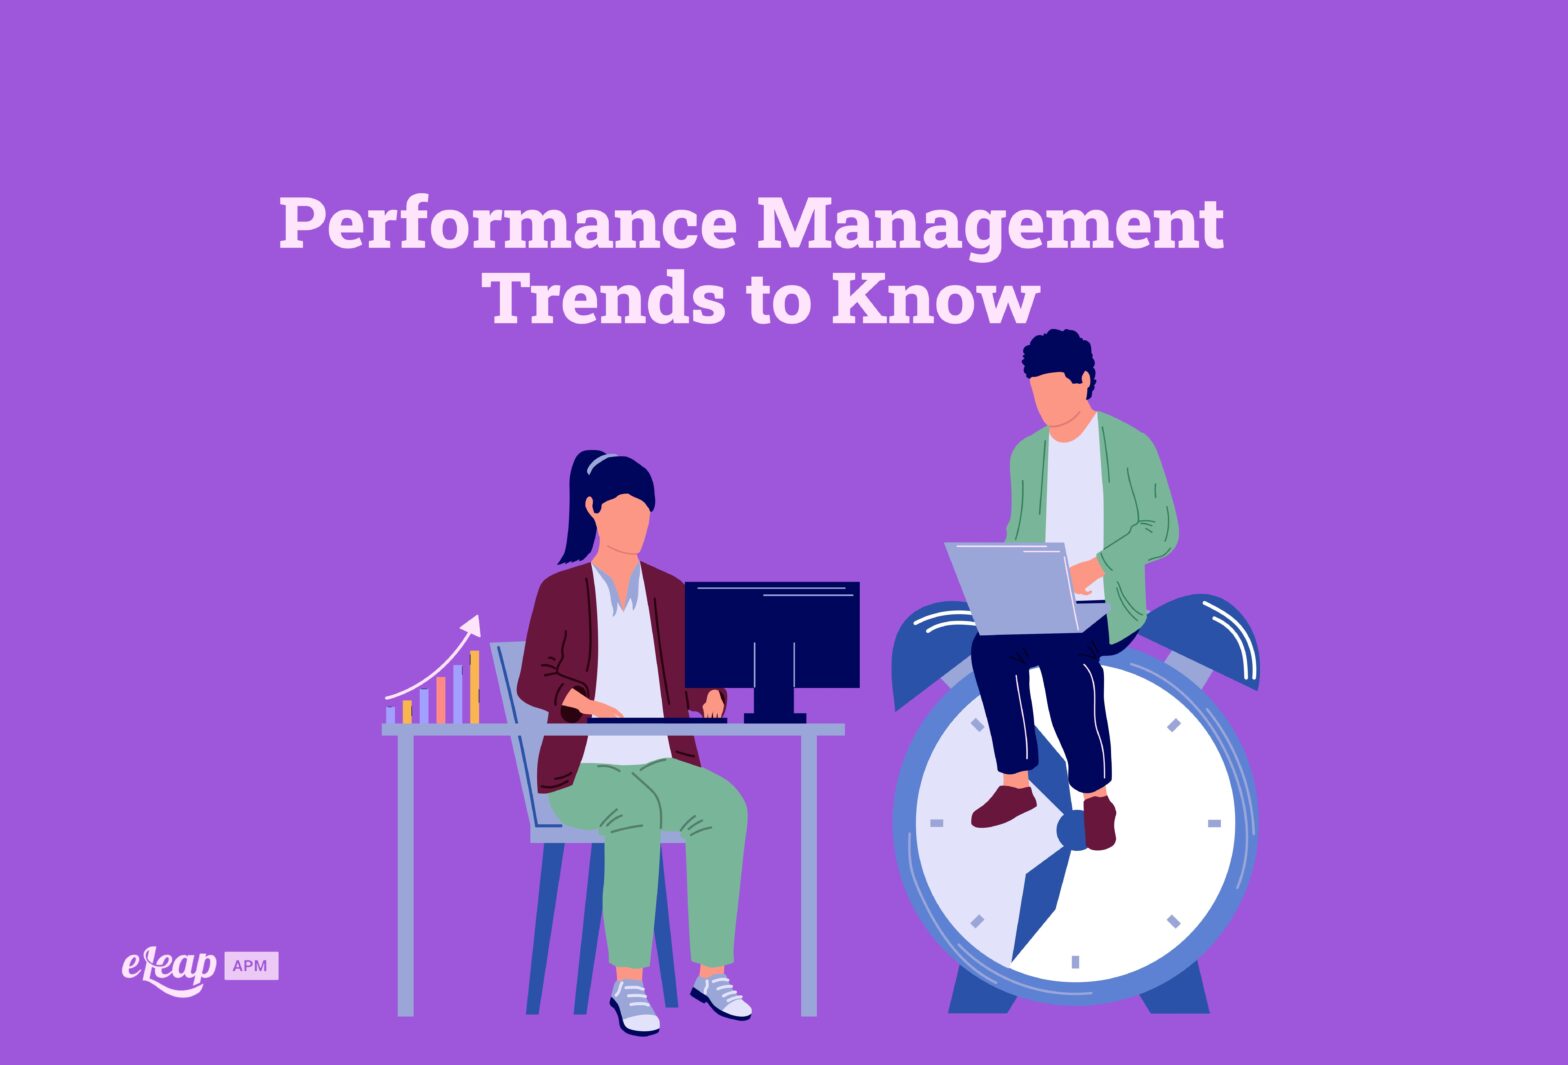 Performance Management Trends to Know